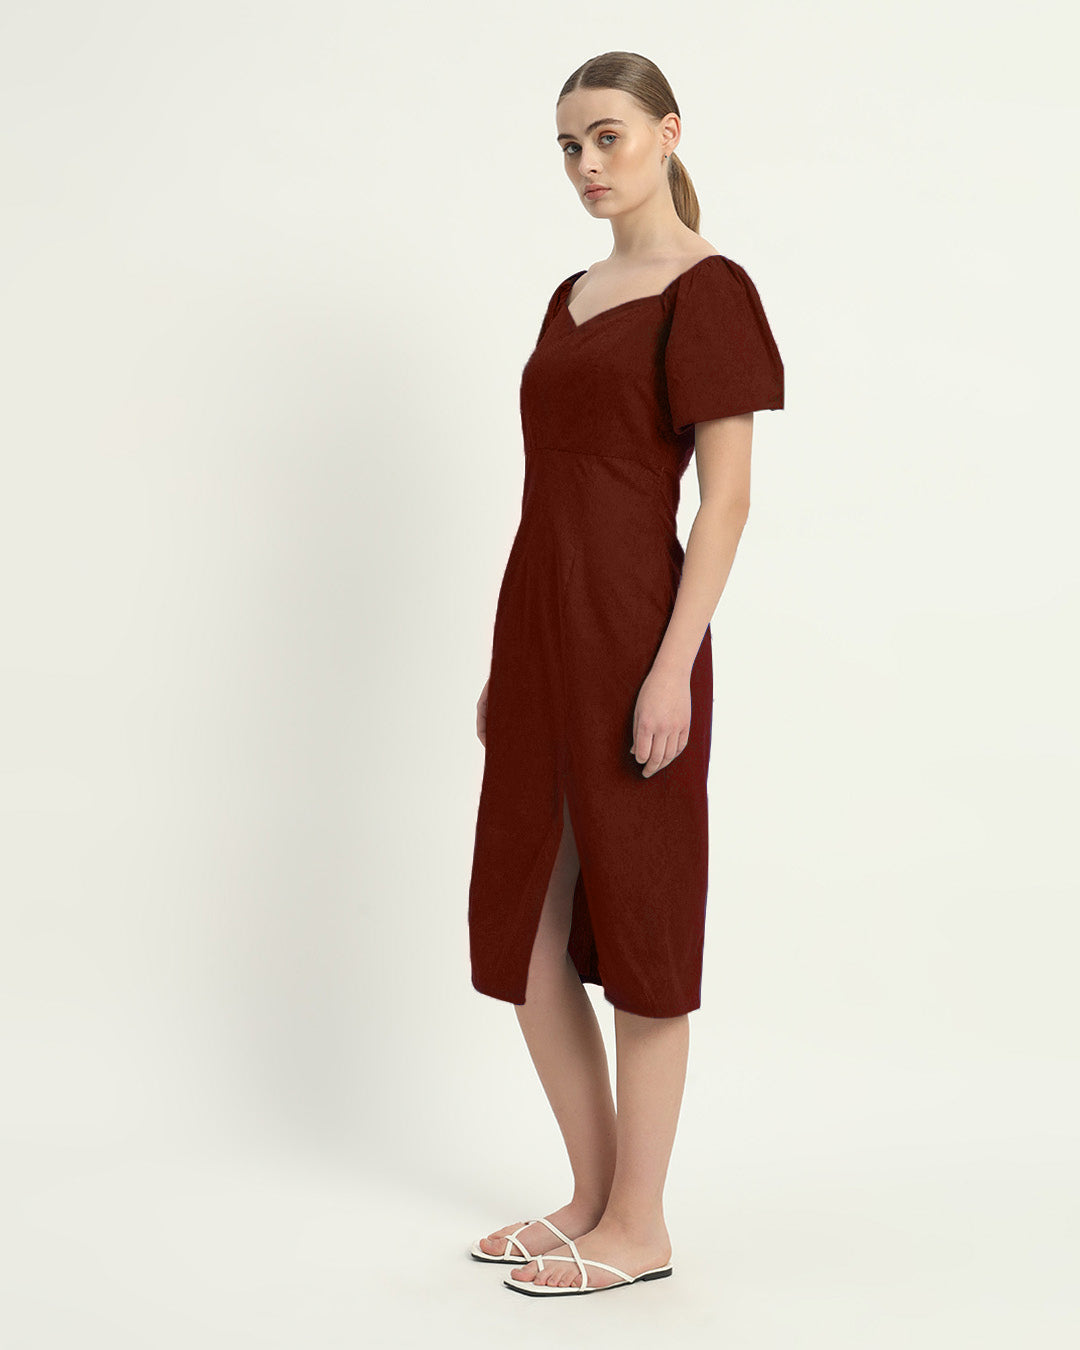 The Erwin Rouge Cotton Dress